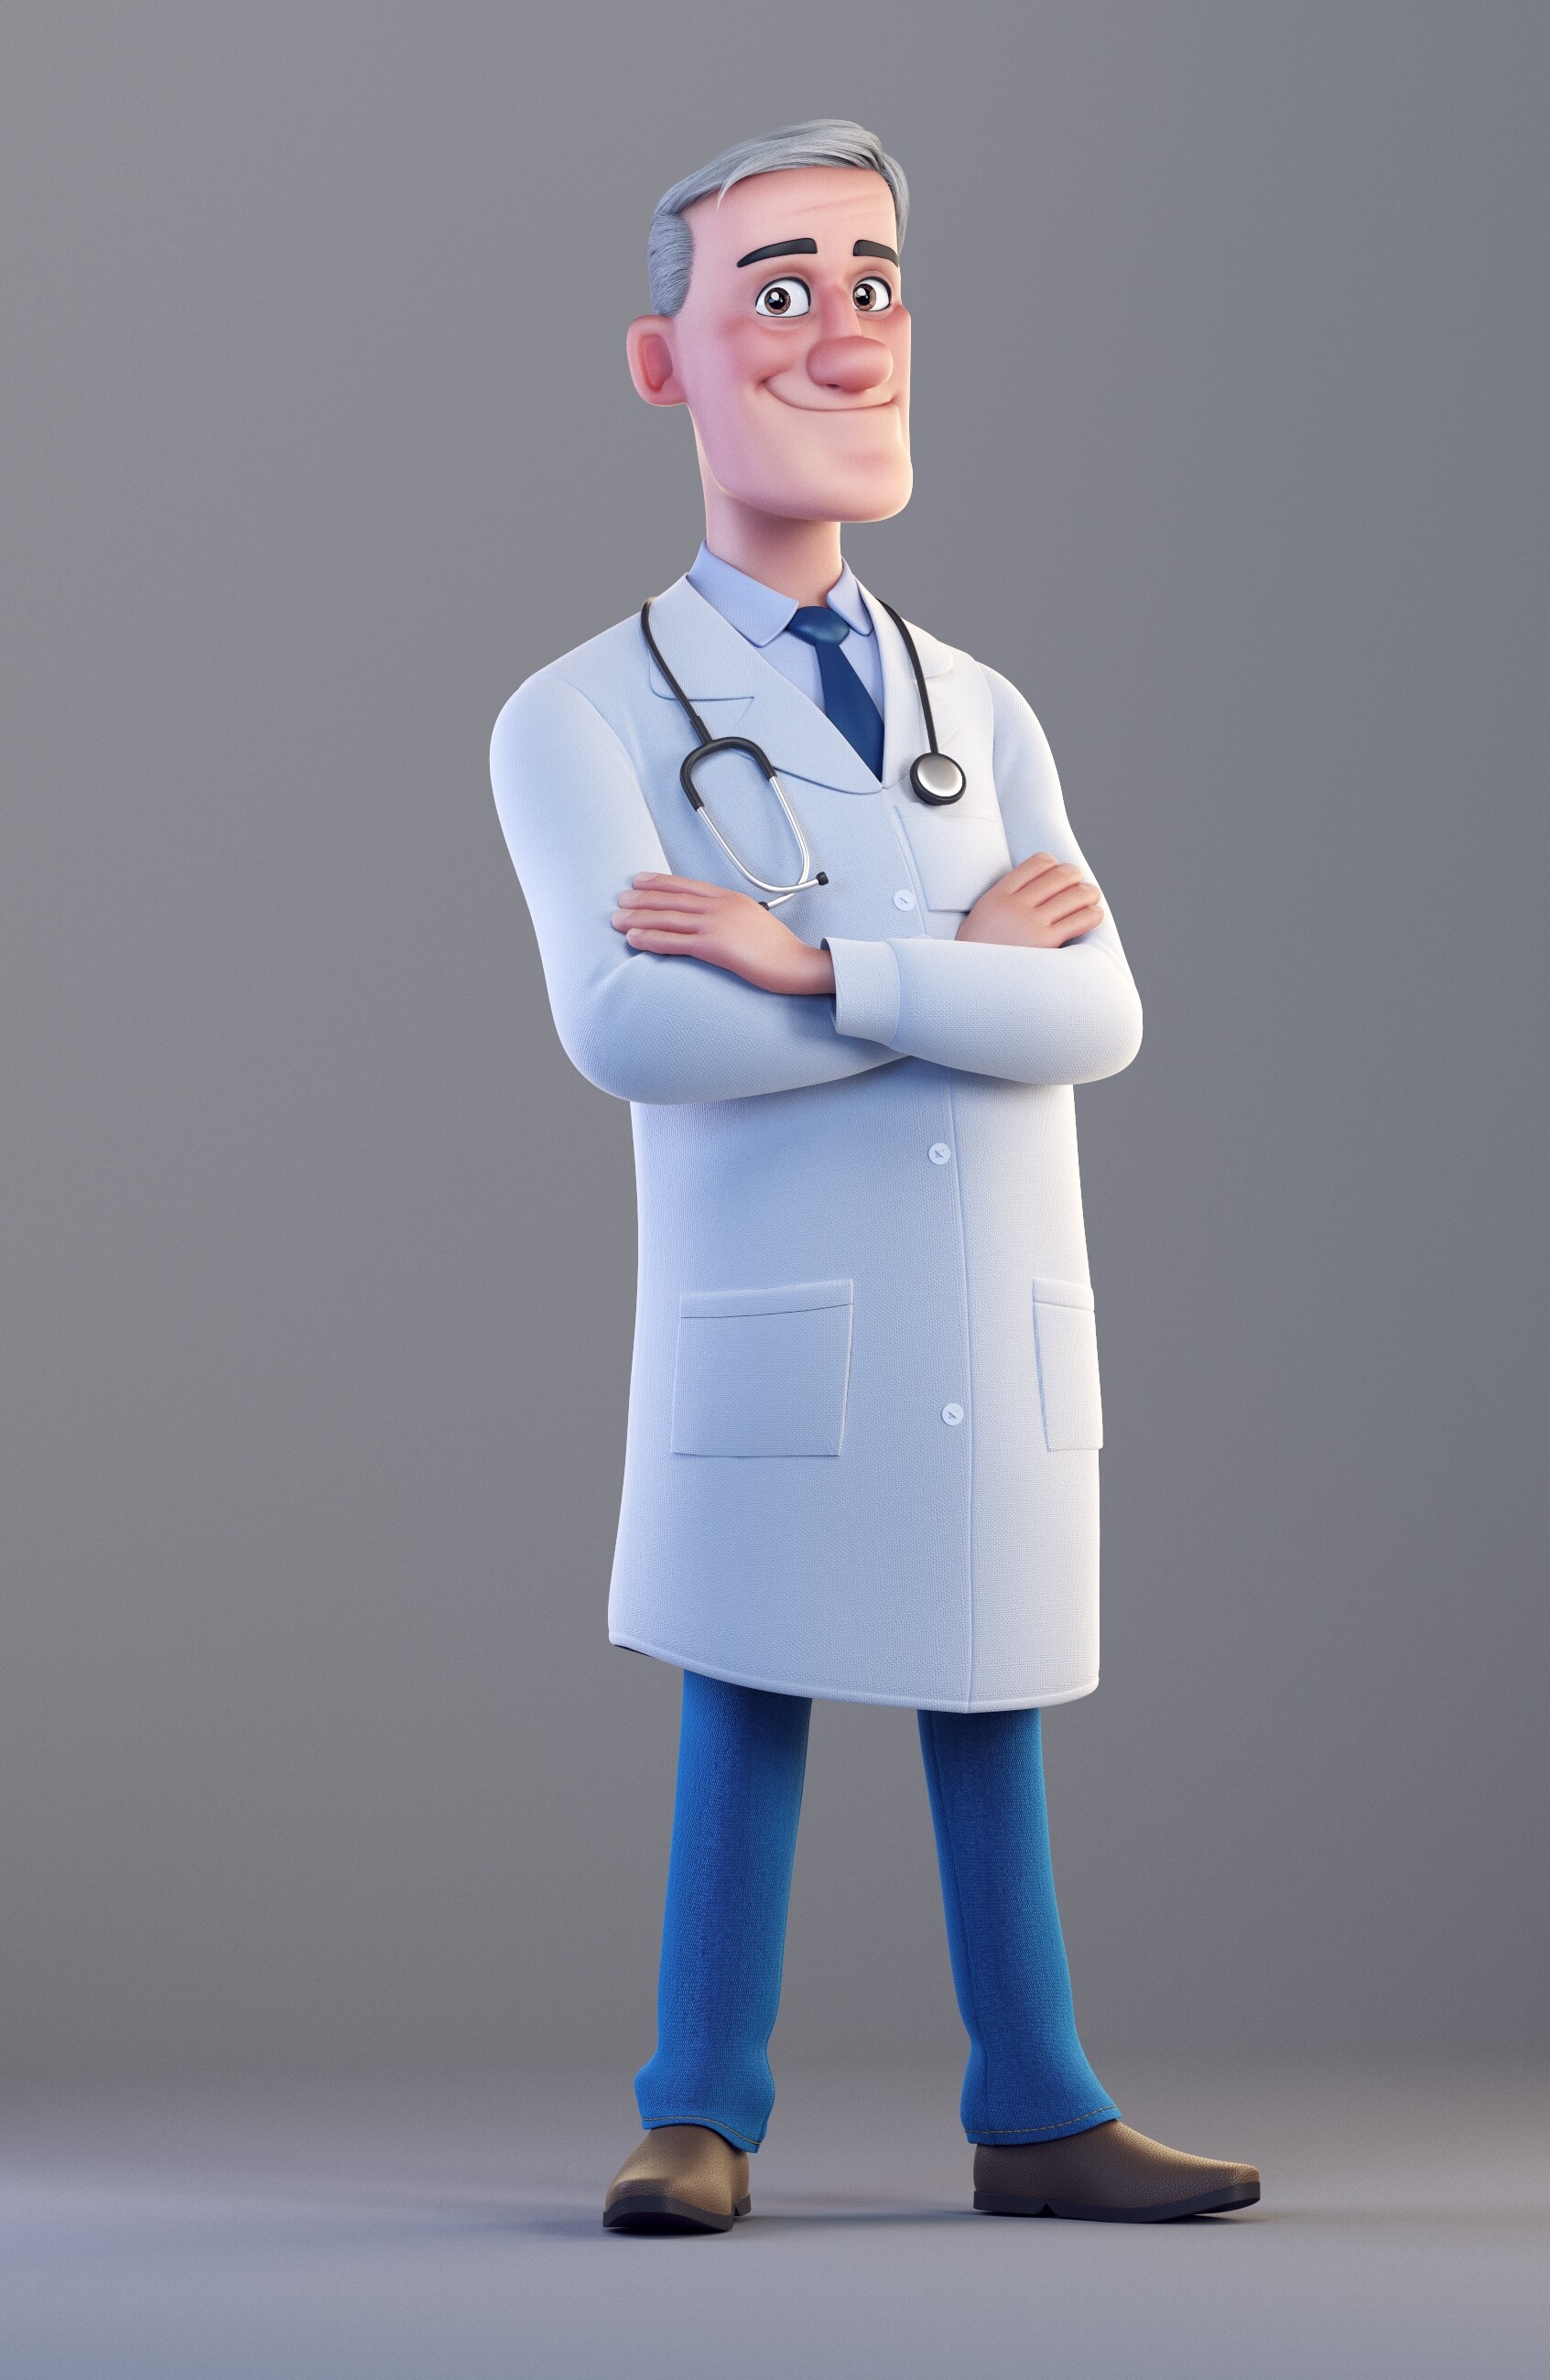 ArtStation - 3d character Dr. Fiscal